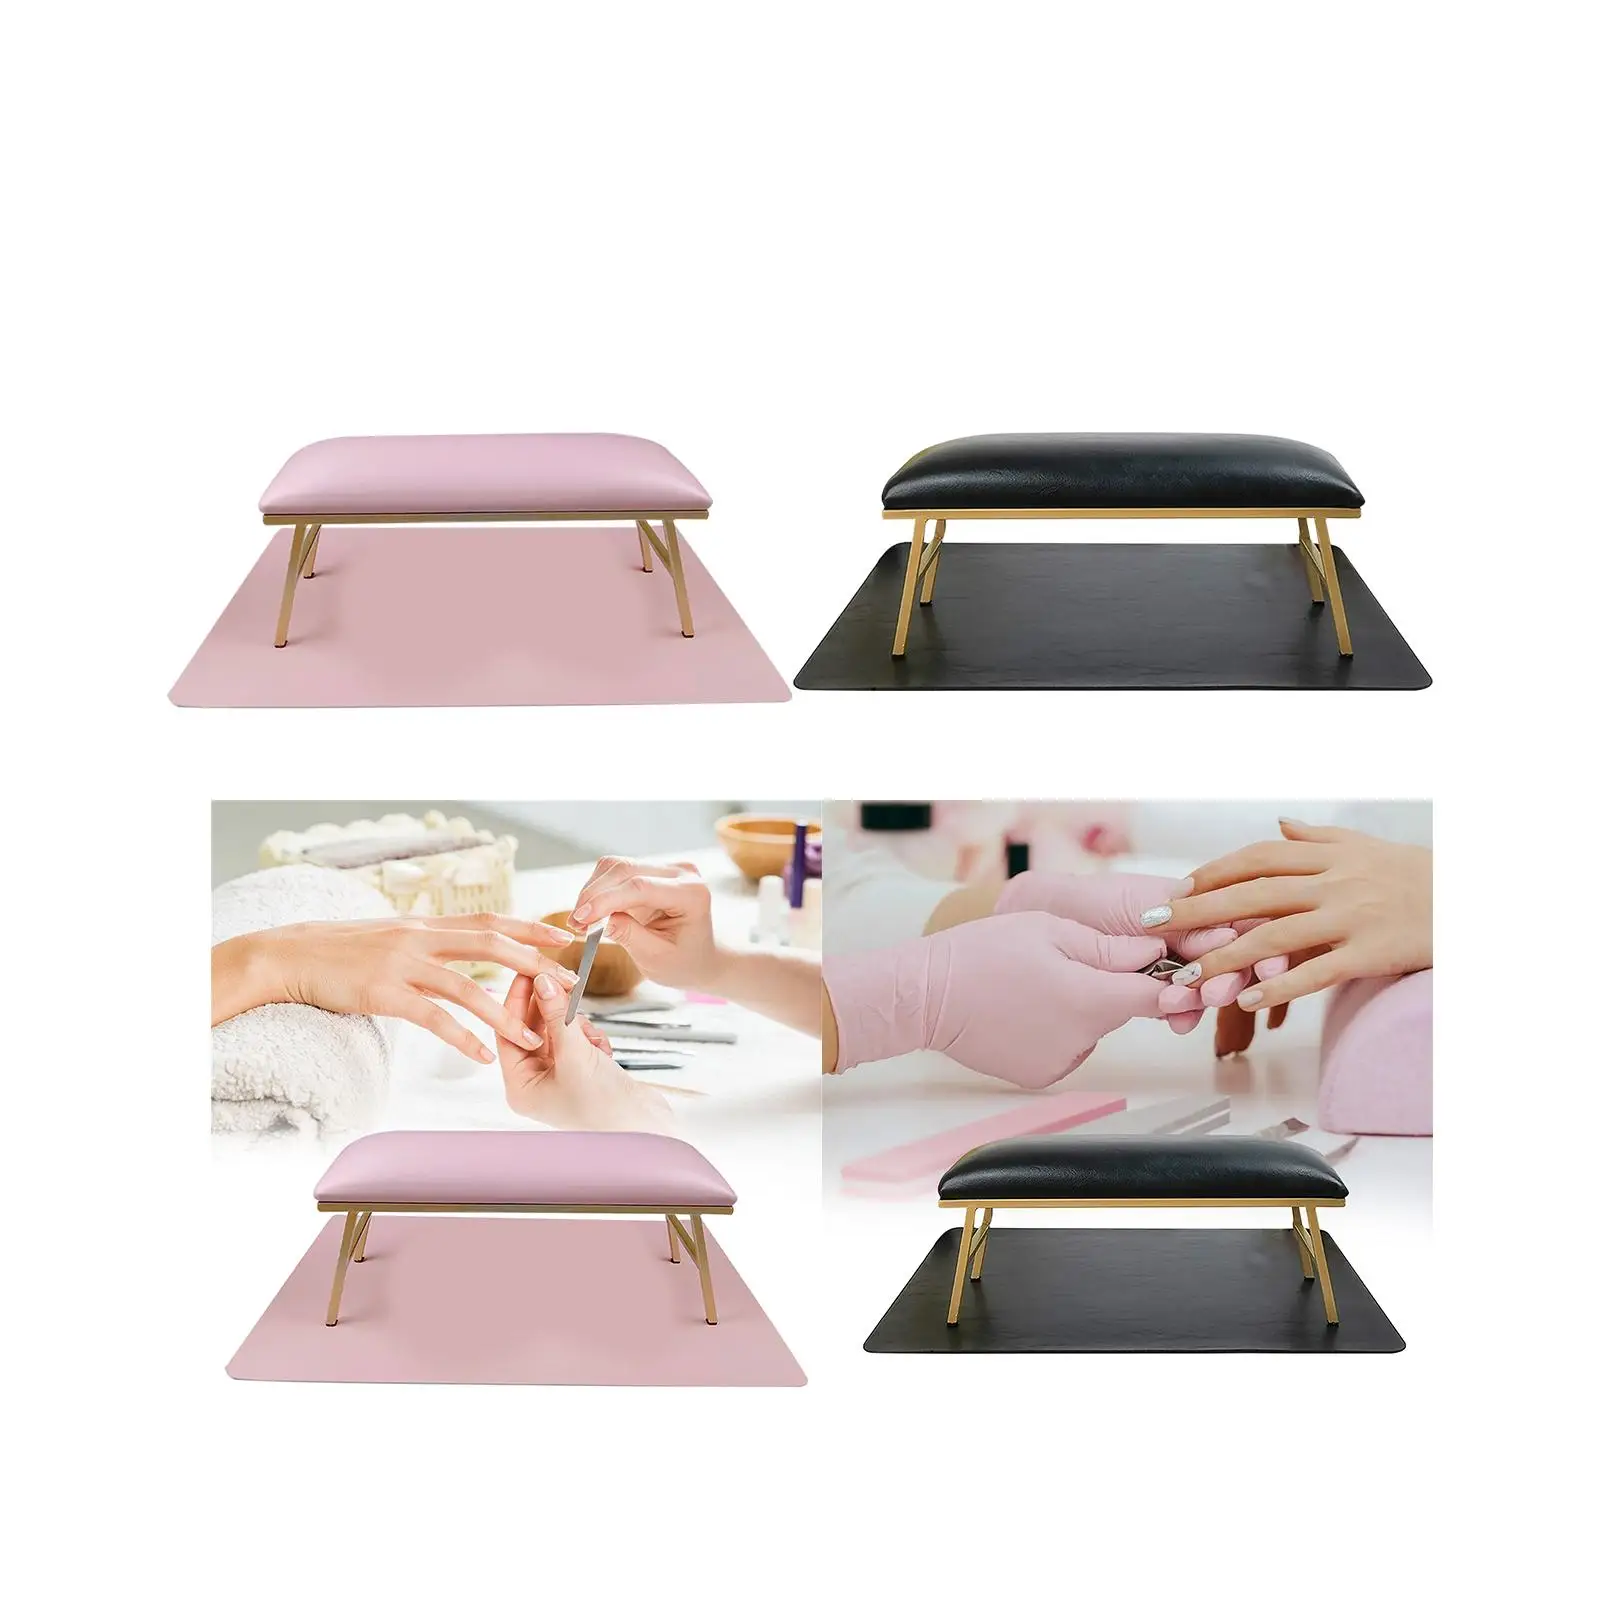 Nail Pillow and Mat Professional Comfortable PU Leather Soft Nail Arm Rest Holder for Salon Home Manicurist Nail Techs Use Hand